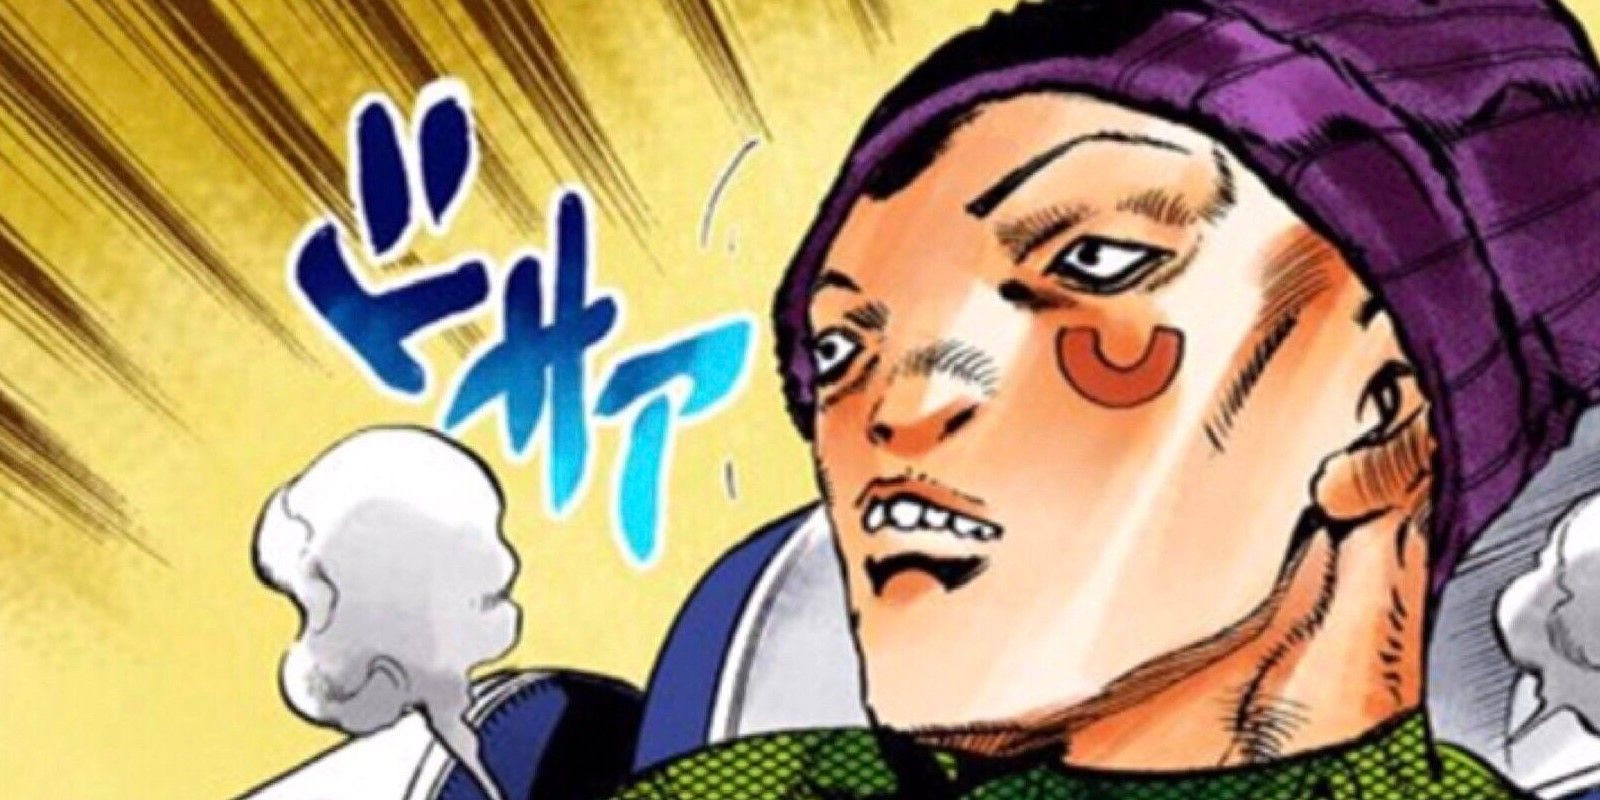 Ungalo, the Stand user of Bohemian Rhapsody in Stone Ocean